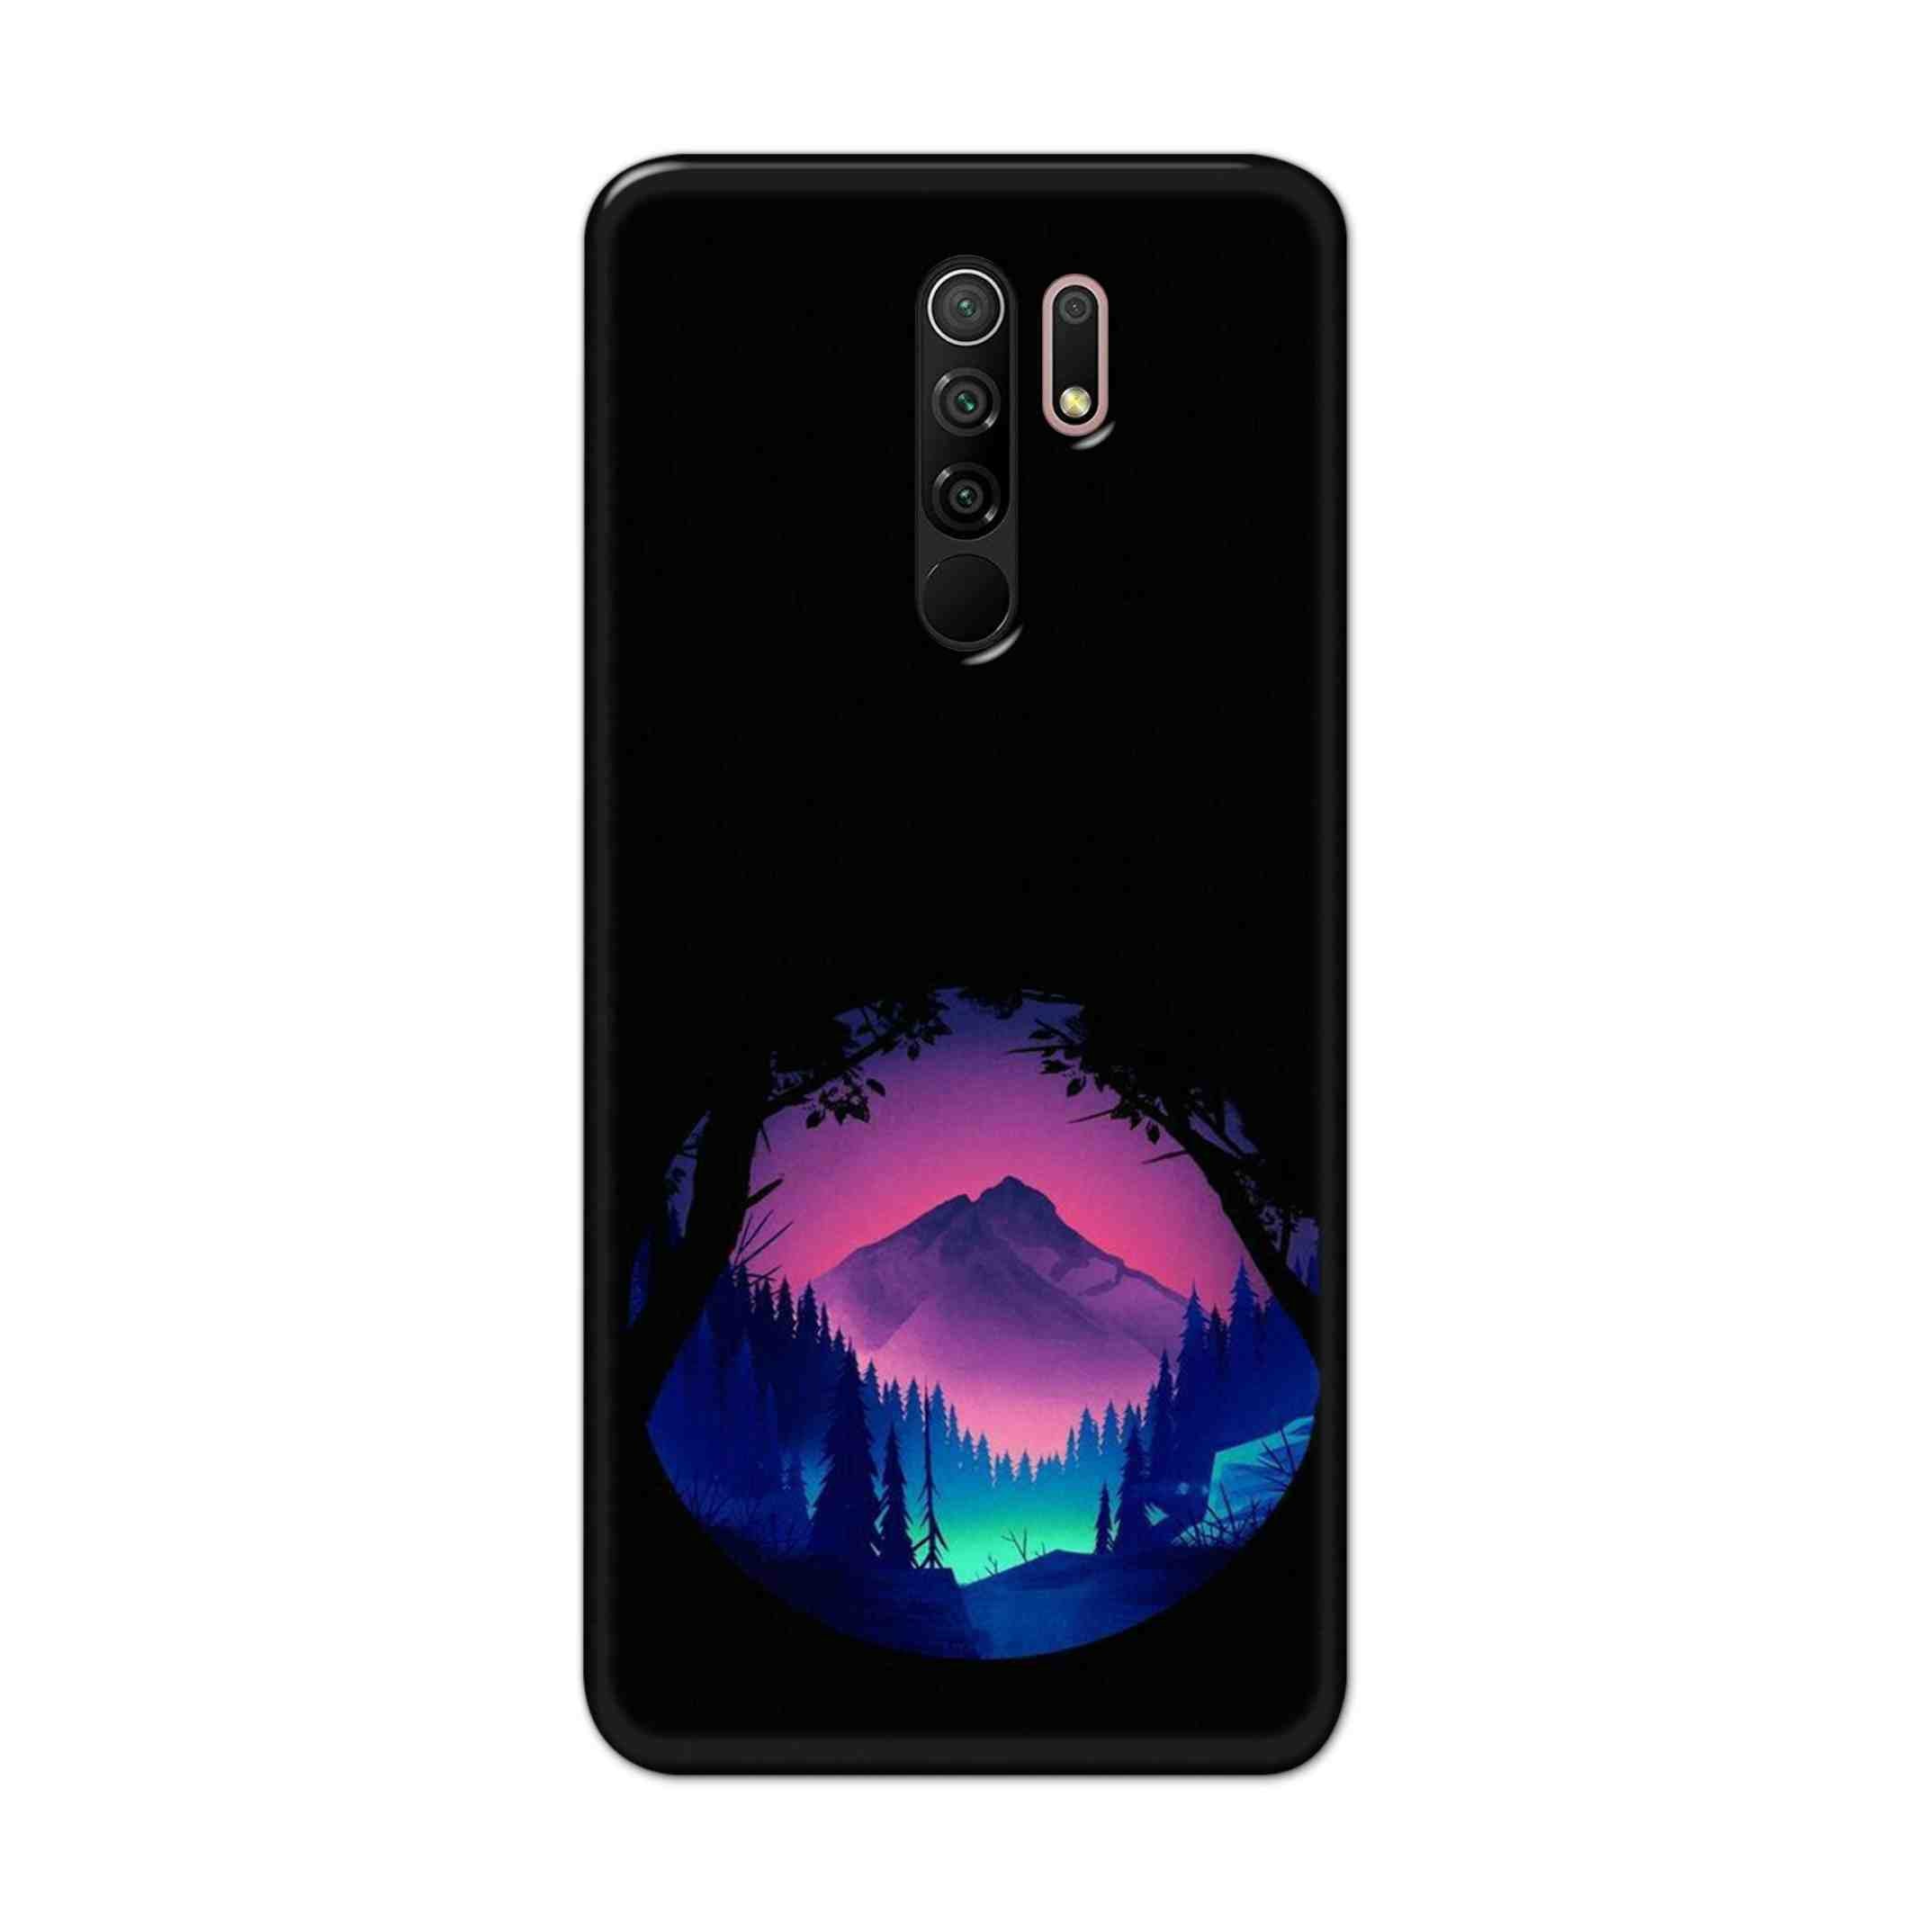 Buy Neon Tables Hard Back Mobile Phone Case Cover For Xiaomi Redmi 9 Prime Online